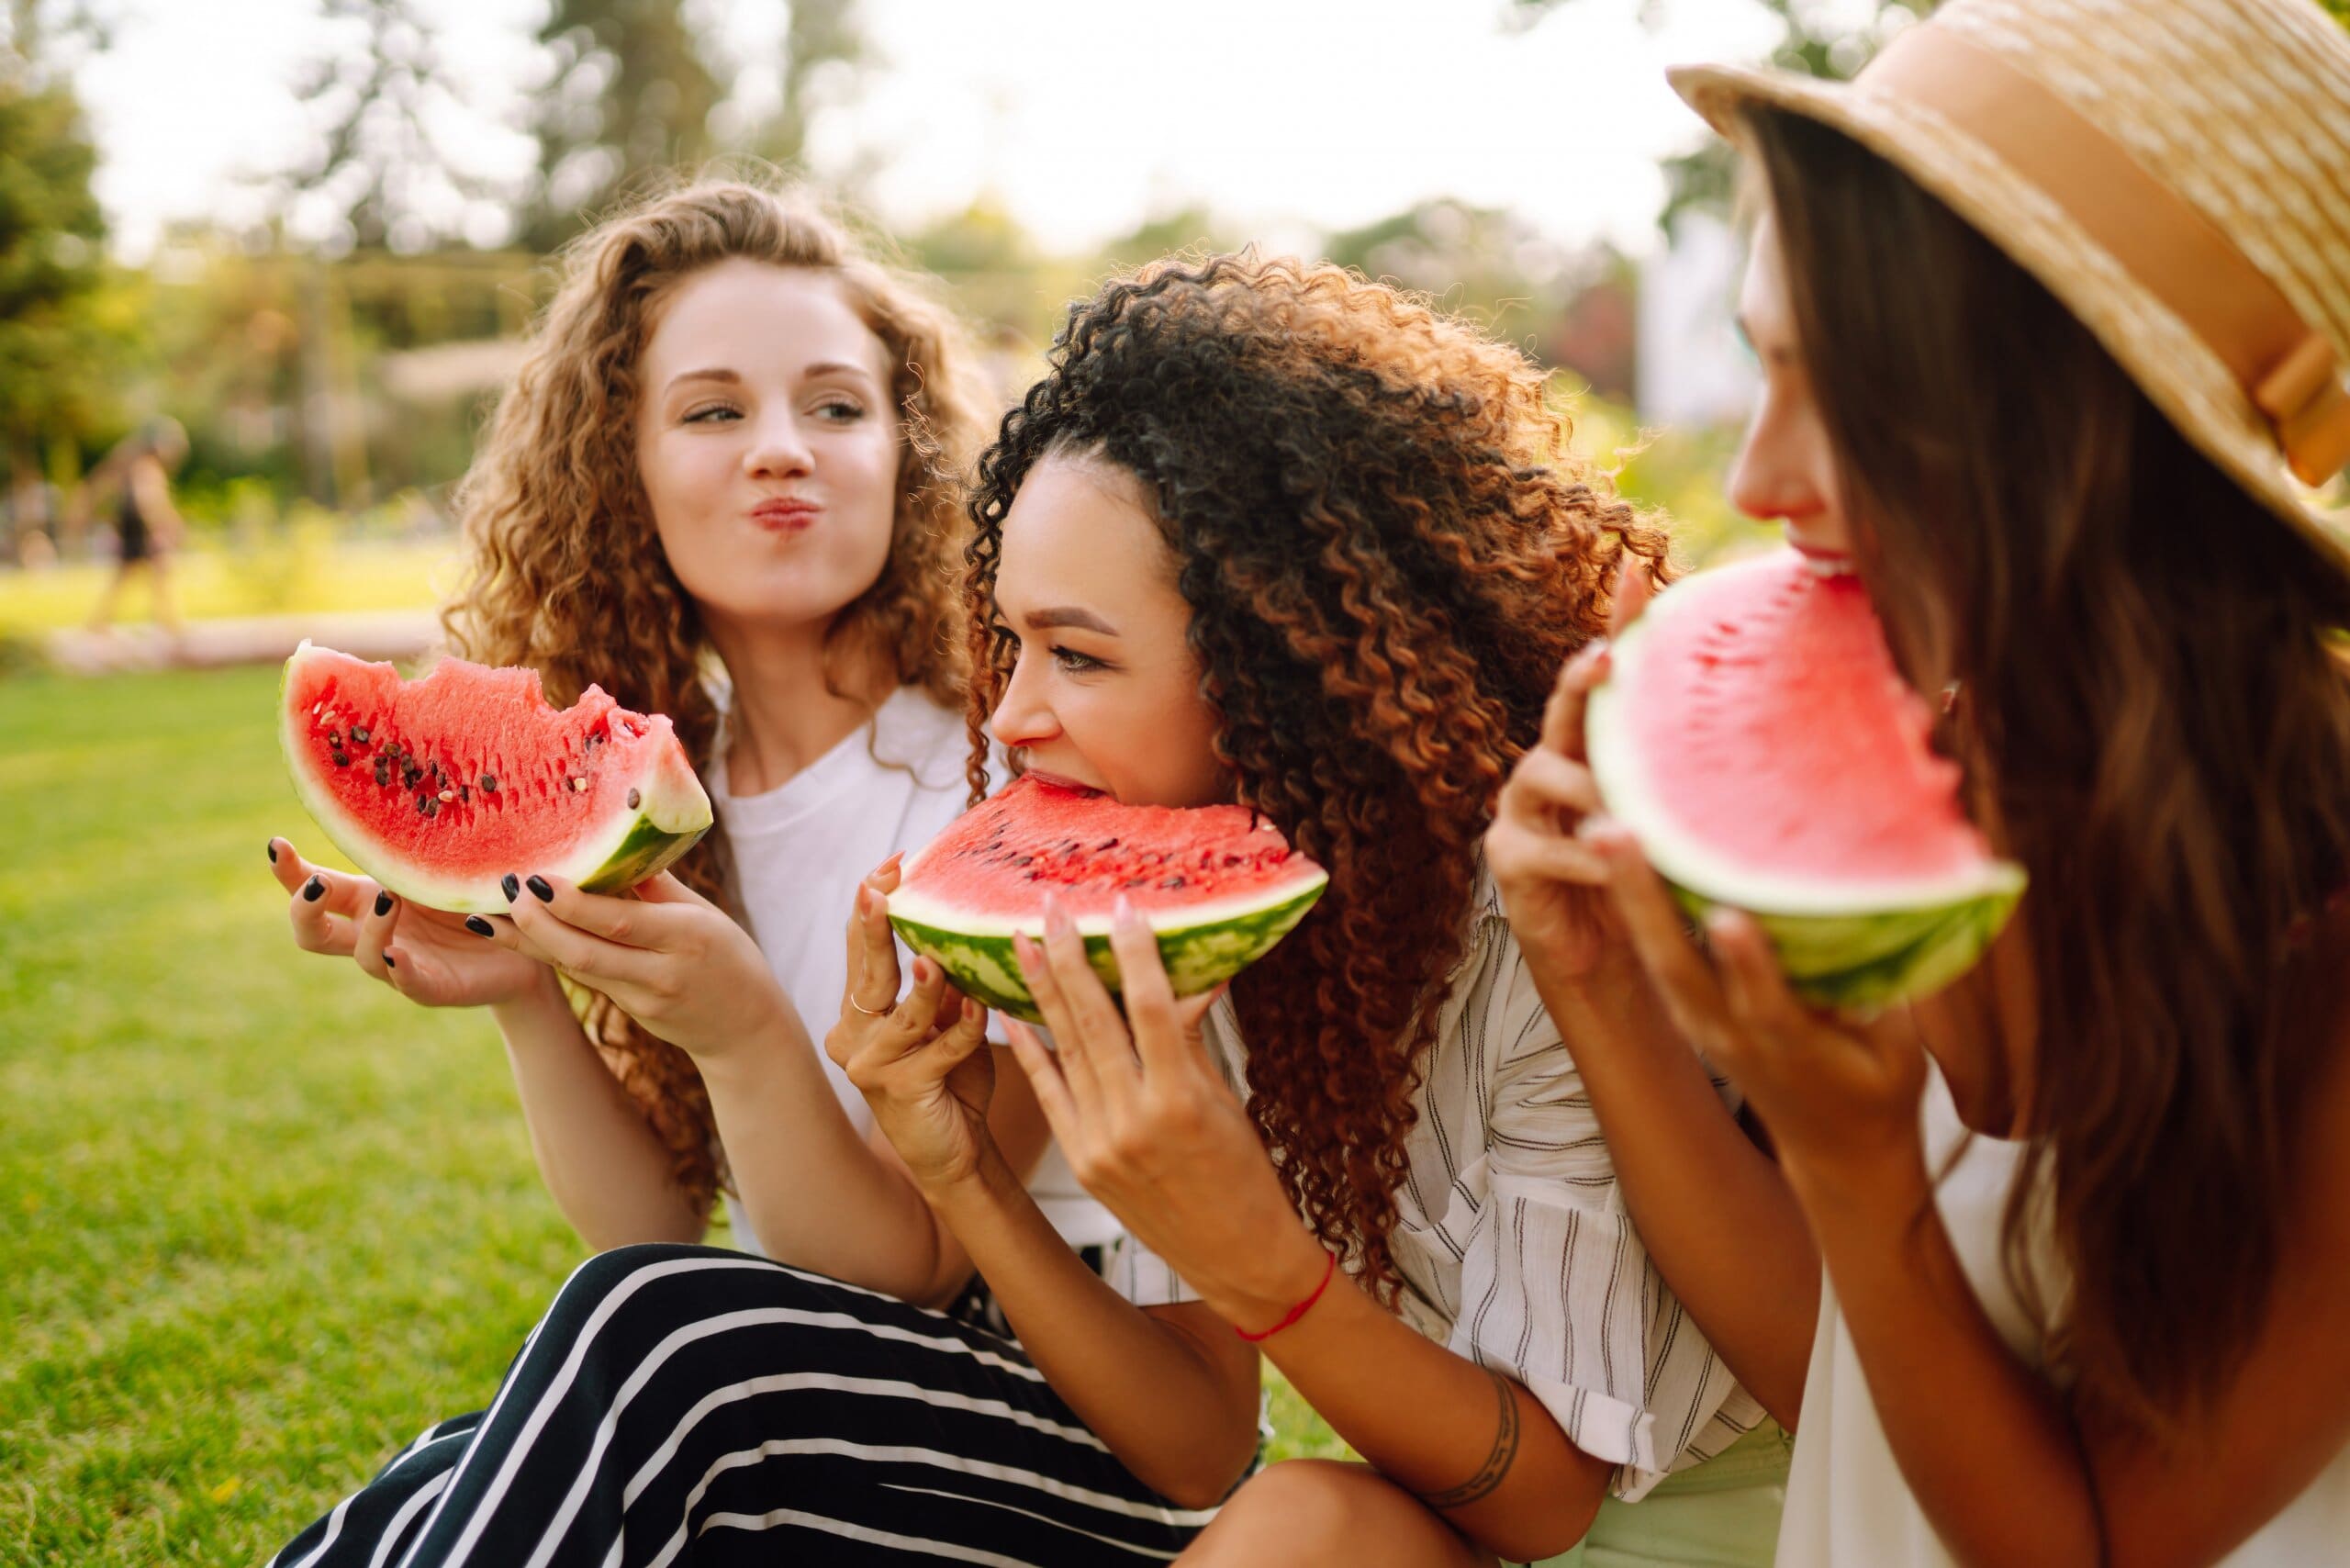 3 girls sat together eating large pieces of watermelon.